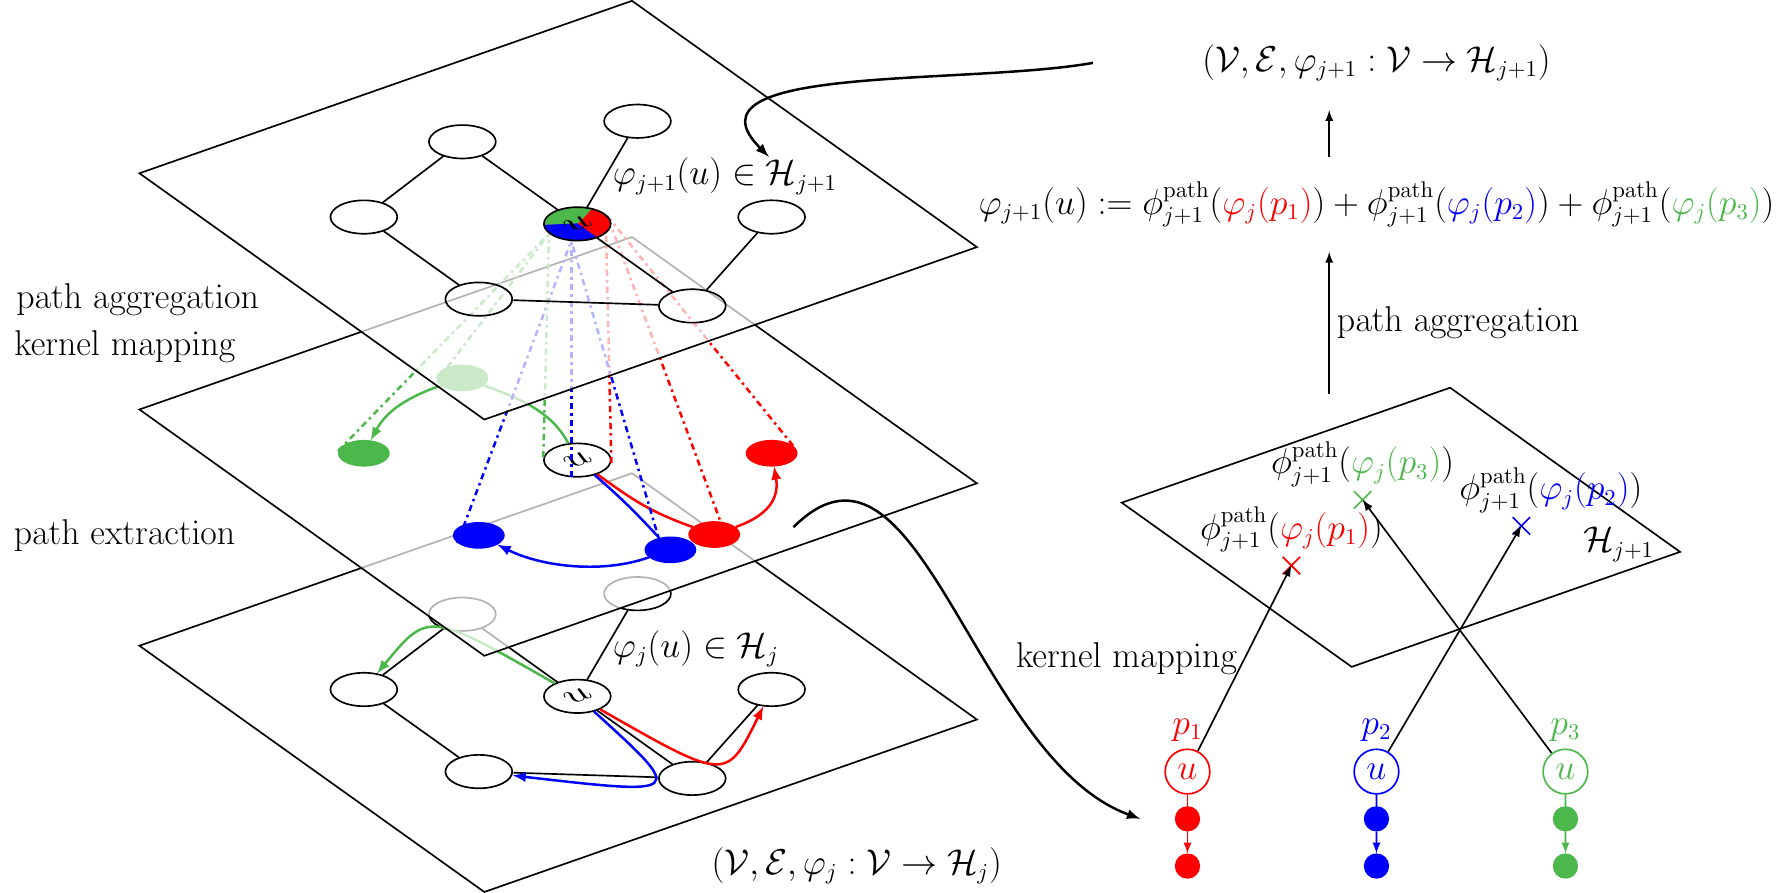 Construction of the graph feature map φj+1\varphi _{j+1} from φj\varphi _j given a graph (𝒱,ℰ)(\mathcal {V},\mathcal {E}). The first step extracts paths of length kk (here colored by red, blue and green) from node uu, then (on the right panel) maps them to a RKHS ℋj+1\mathcal {H}_{j+1} via the Gaussian kernel mapping. The new map φj+1\varphi _{j+1} at uu is obtained by local path aggregation (pooling) of their representations in ℋj+1\mathcal {H}_{j+1}. The representations for other nodes can be obtained in the same way. In practice, such a model is implemented by using finite-dimensional embeddings approximating the feature maps.